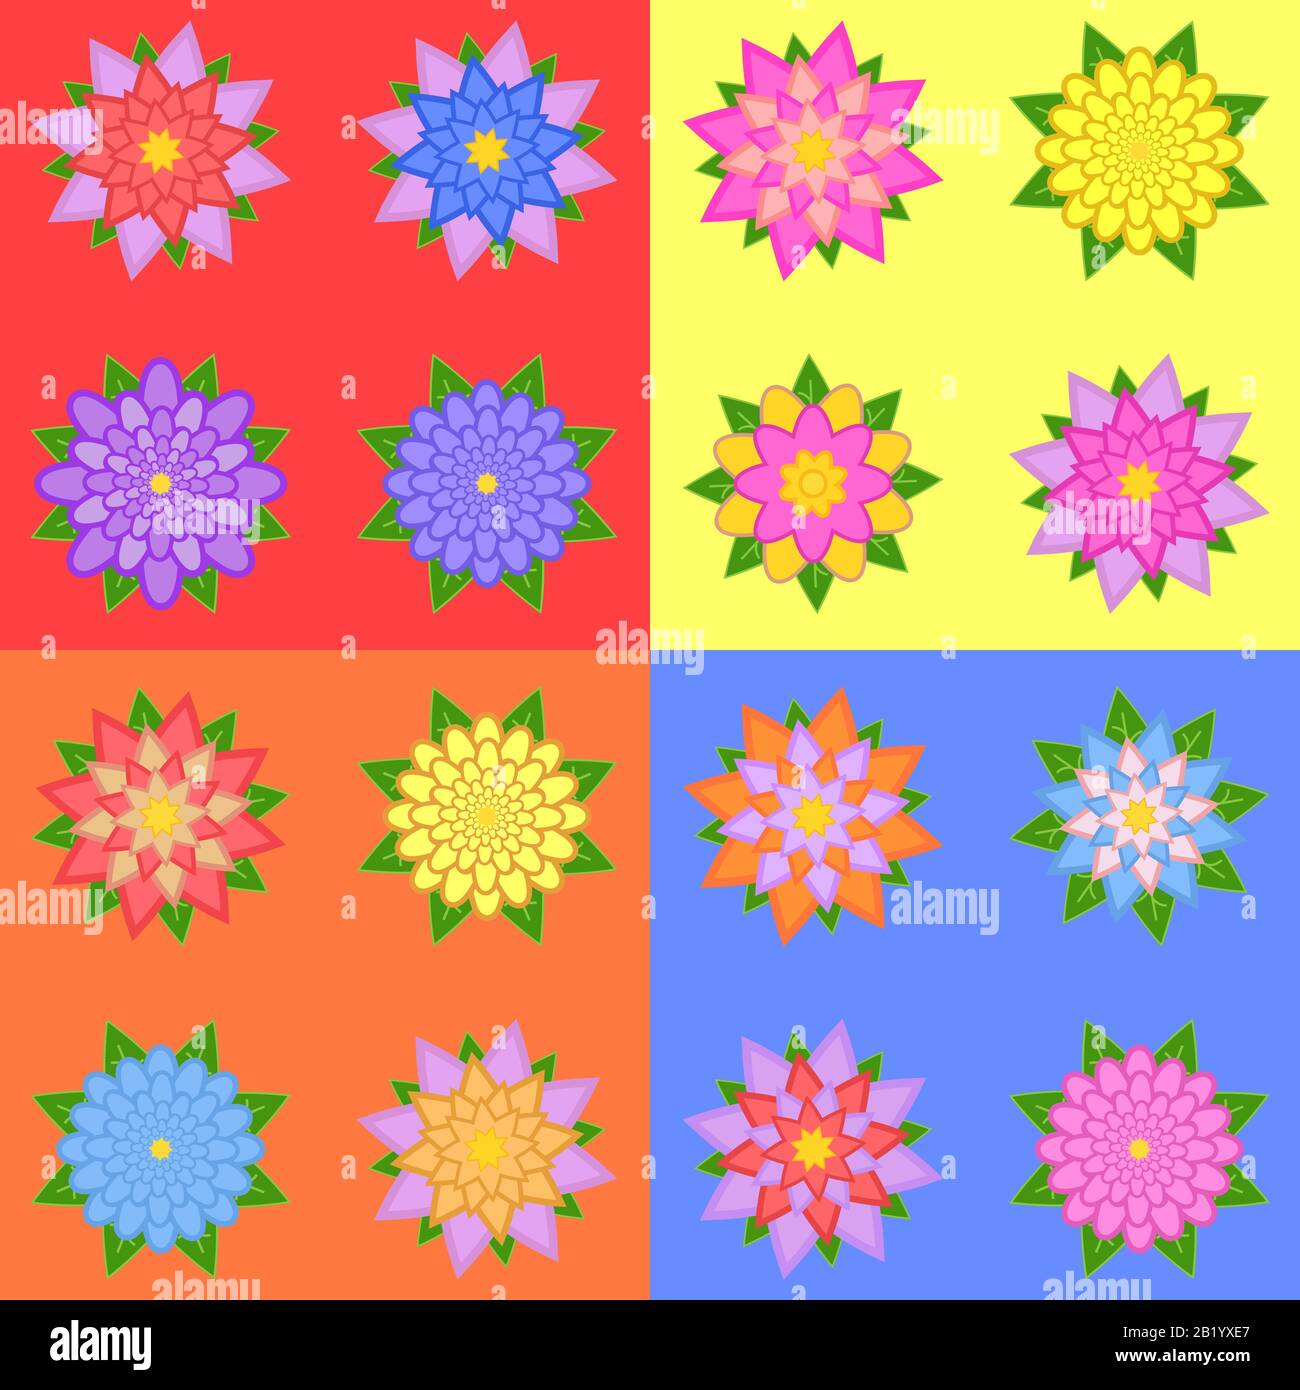 A group of flower Stock Vector Images - Alamy